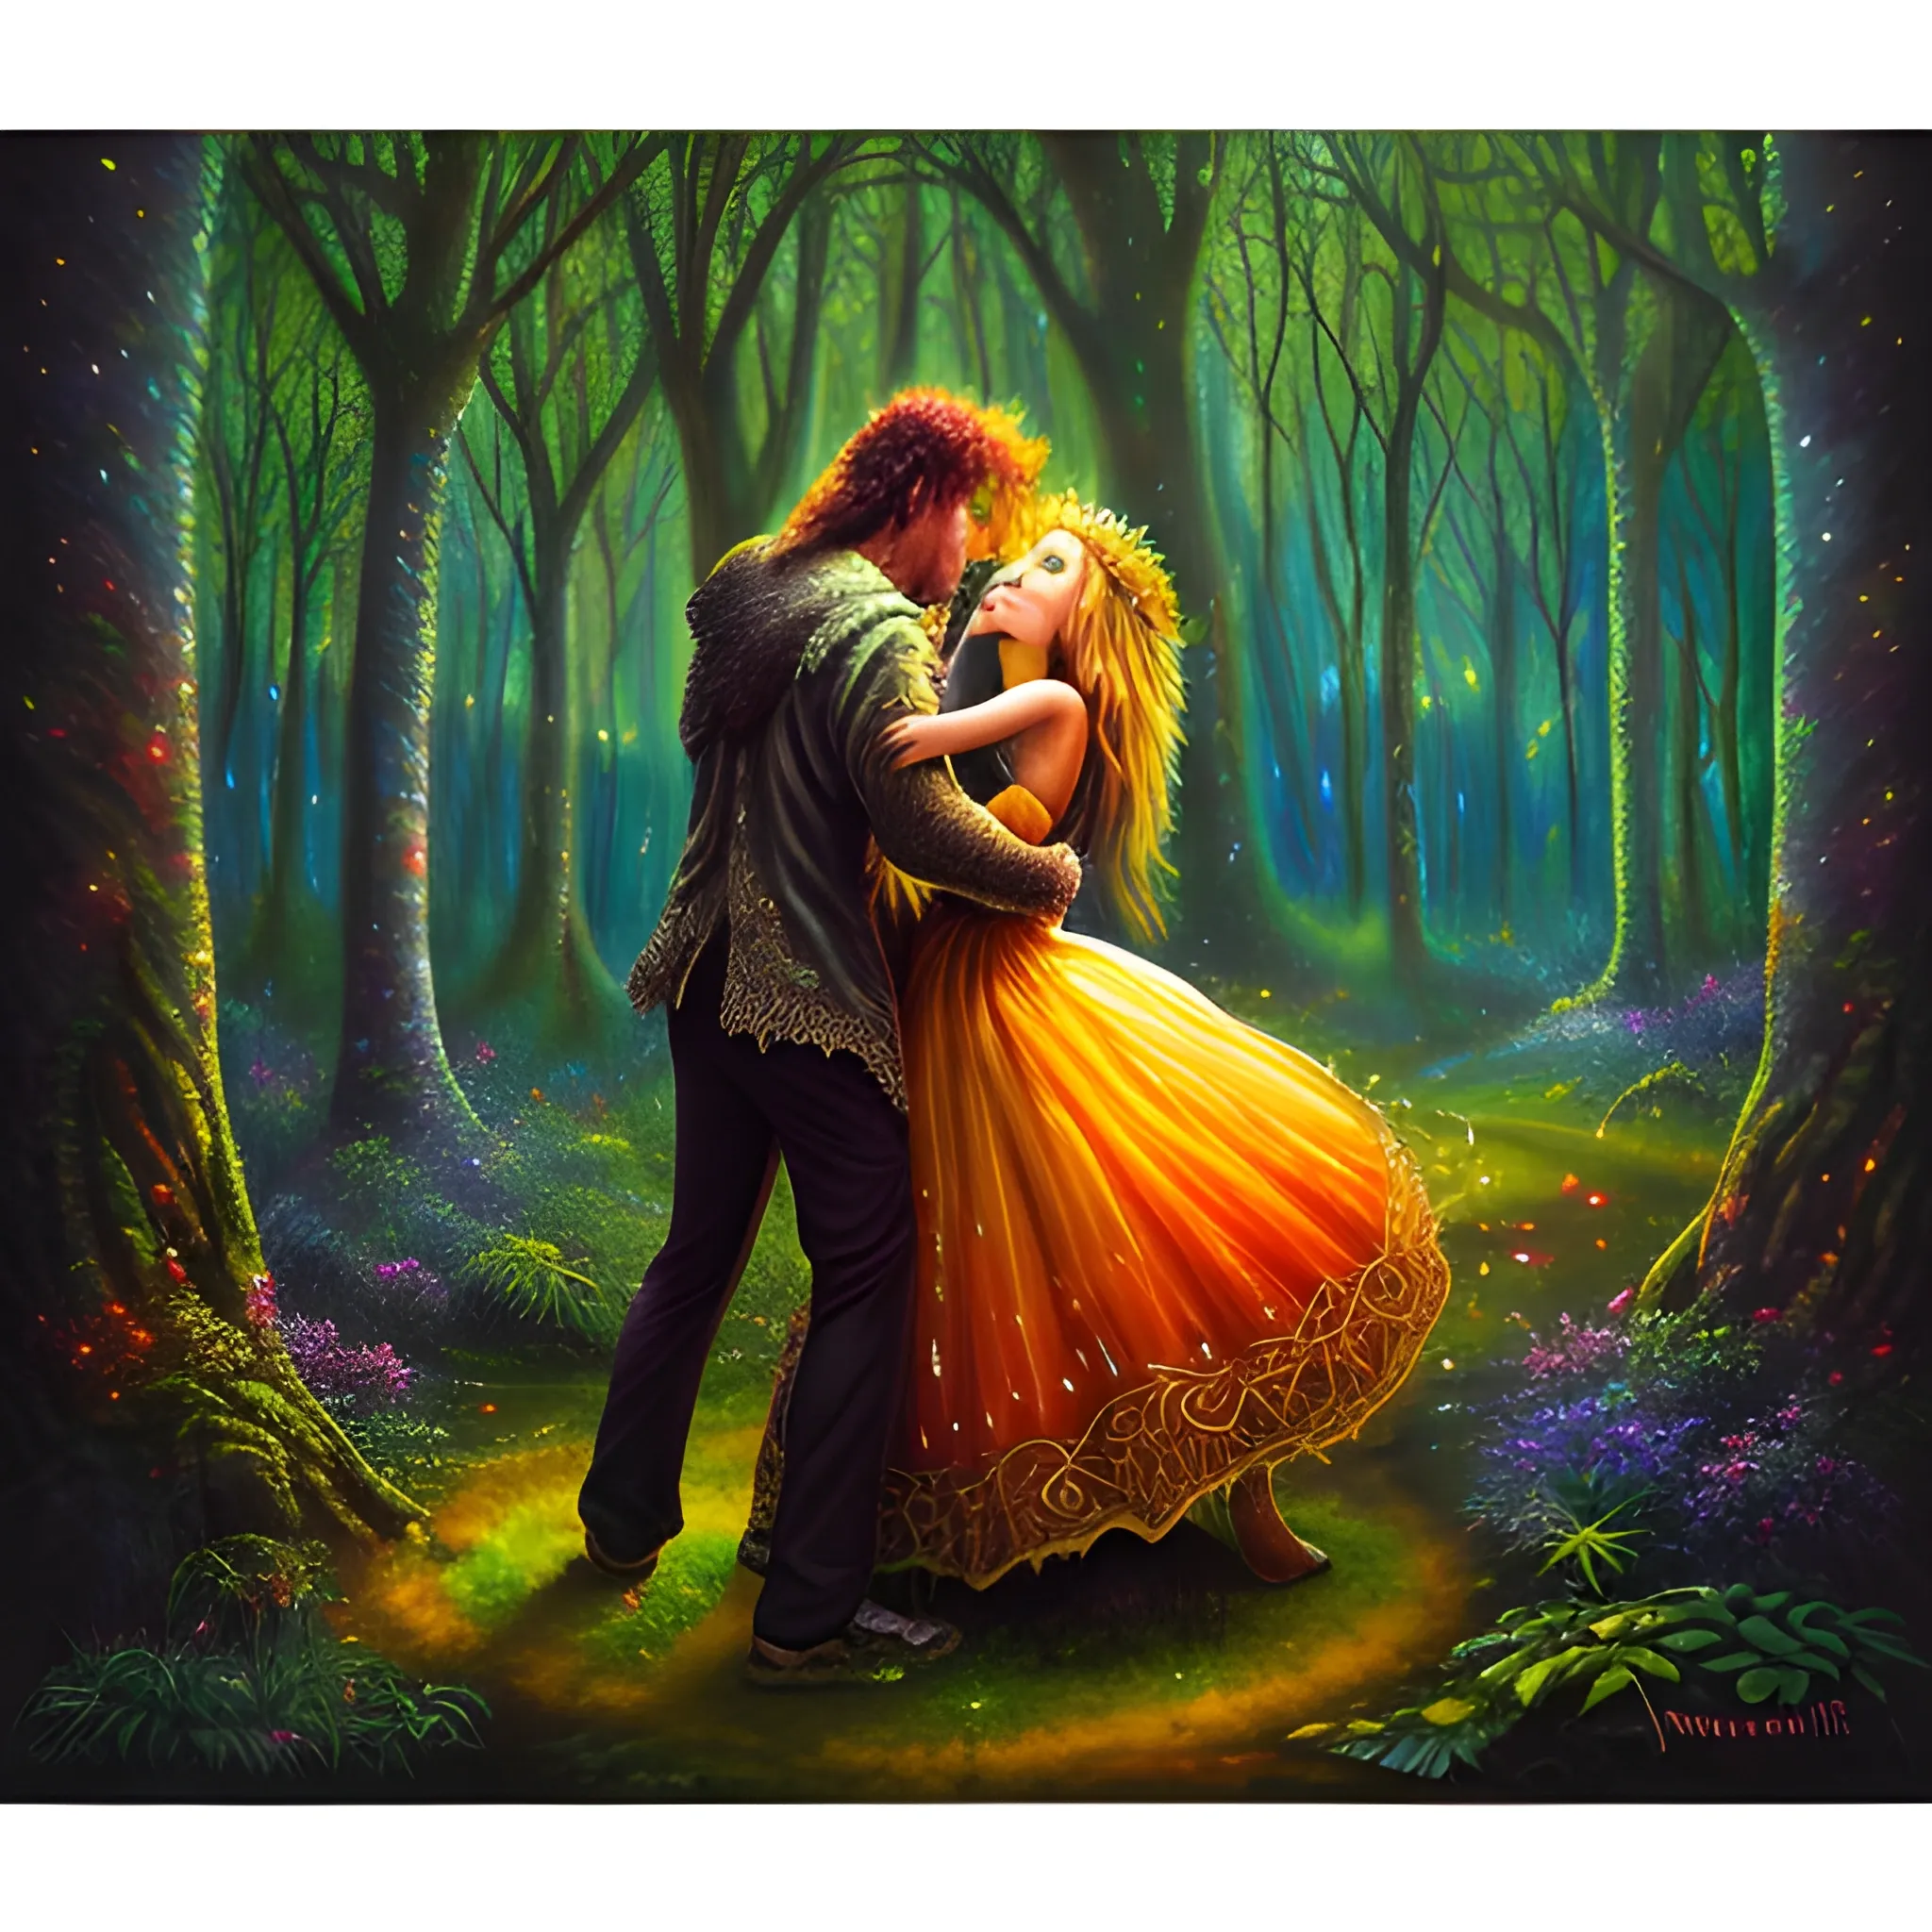 In the heart of the enchanted forest, the DJ conjures melodies that lure mythical creatures from hibernation. The drums' resounding pulse harmonizes with the whispers of trees, creating an otherworldly symphony. Lose yourself in nature's most mesmerizing dance., Oil Painting